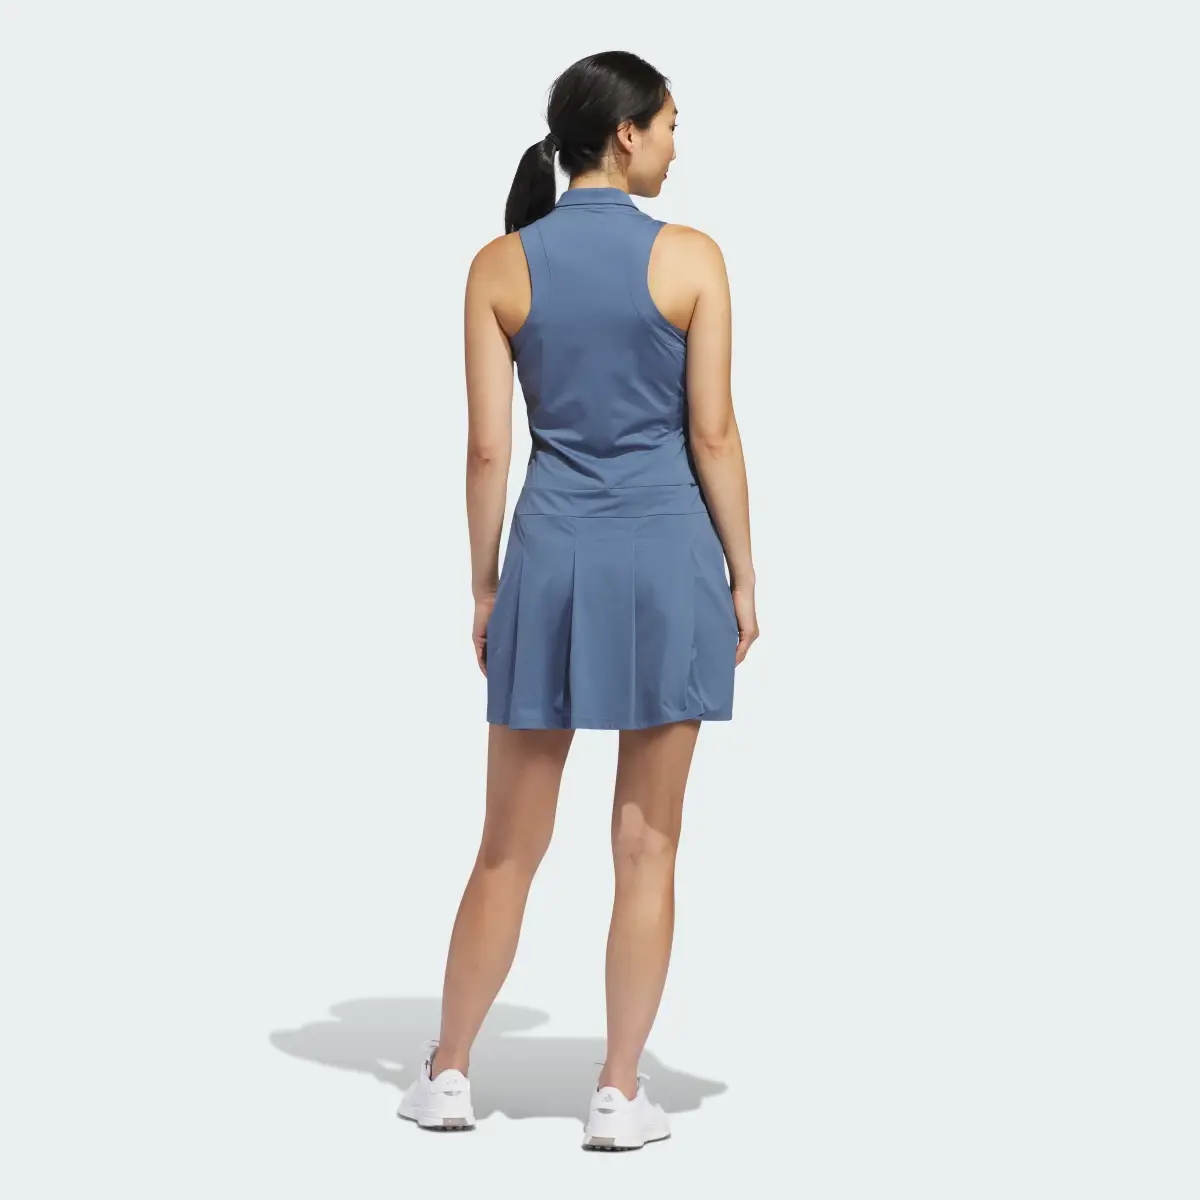 Adidas Women's Ultimate365 Tour Pleated Dress. 3